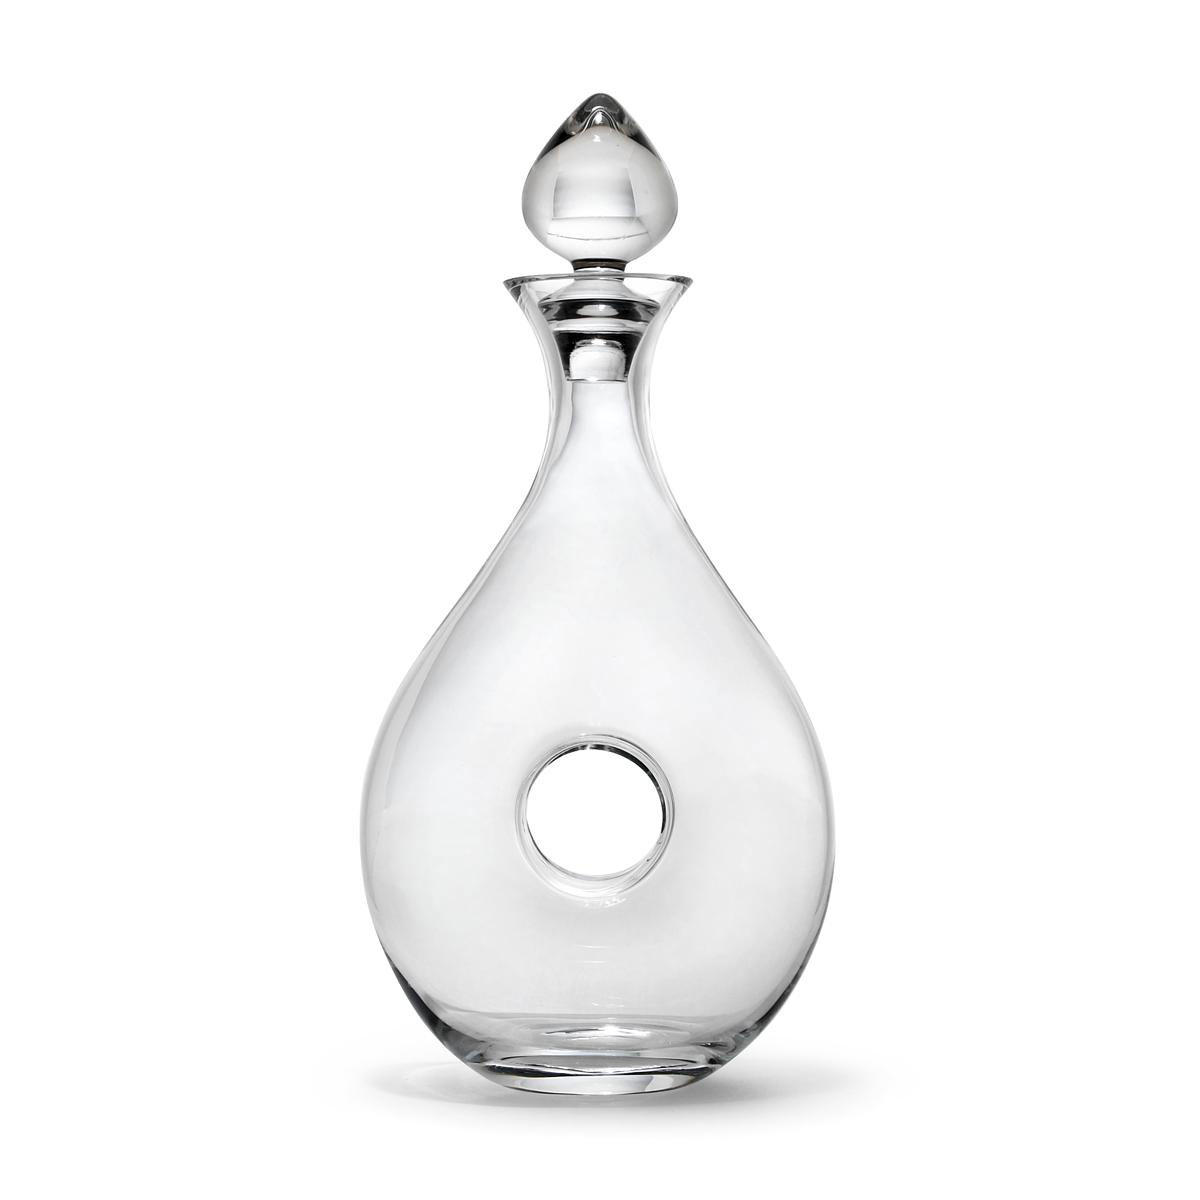 Lenox Tuscany Classics, Pierced Decanter with Stopper